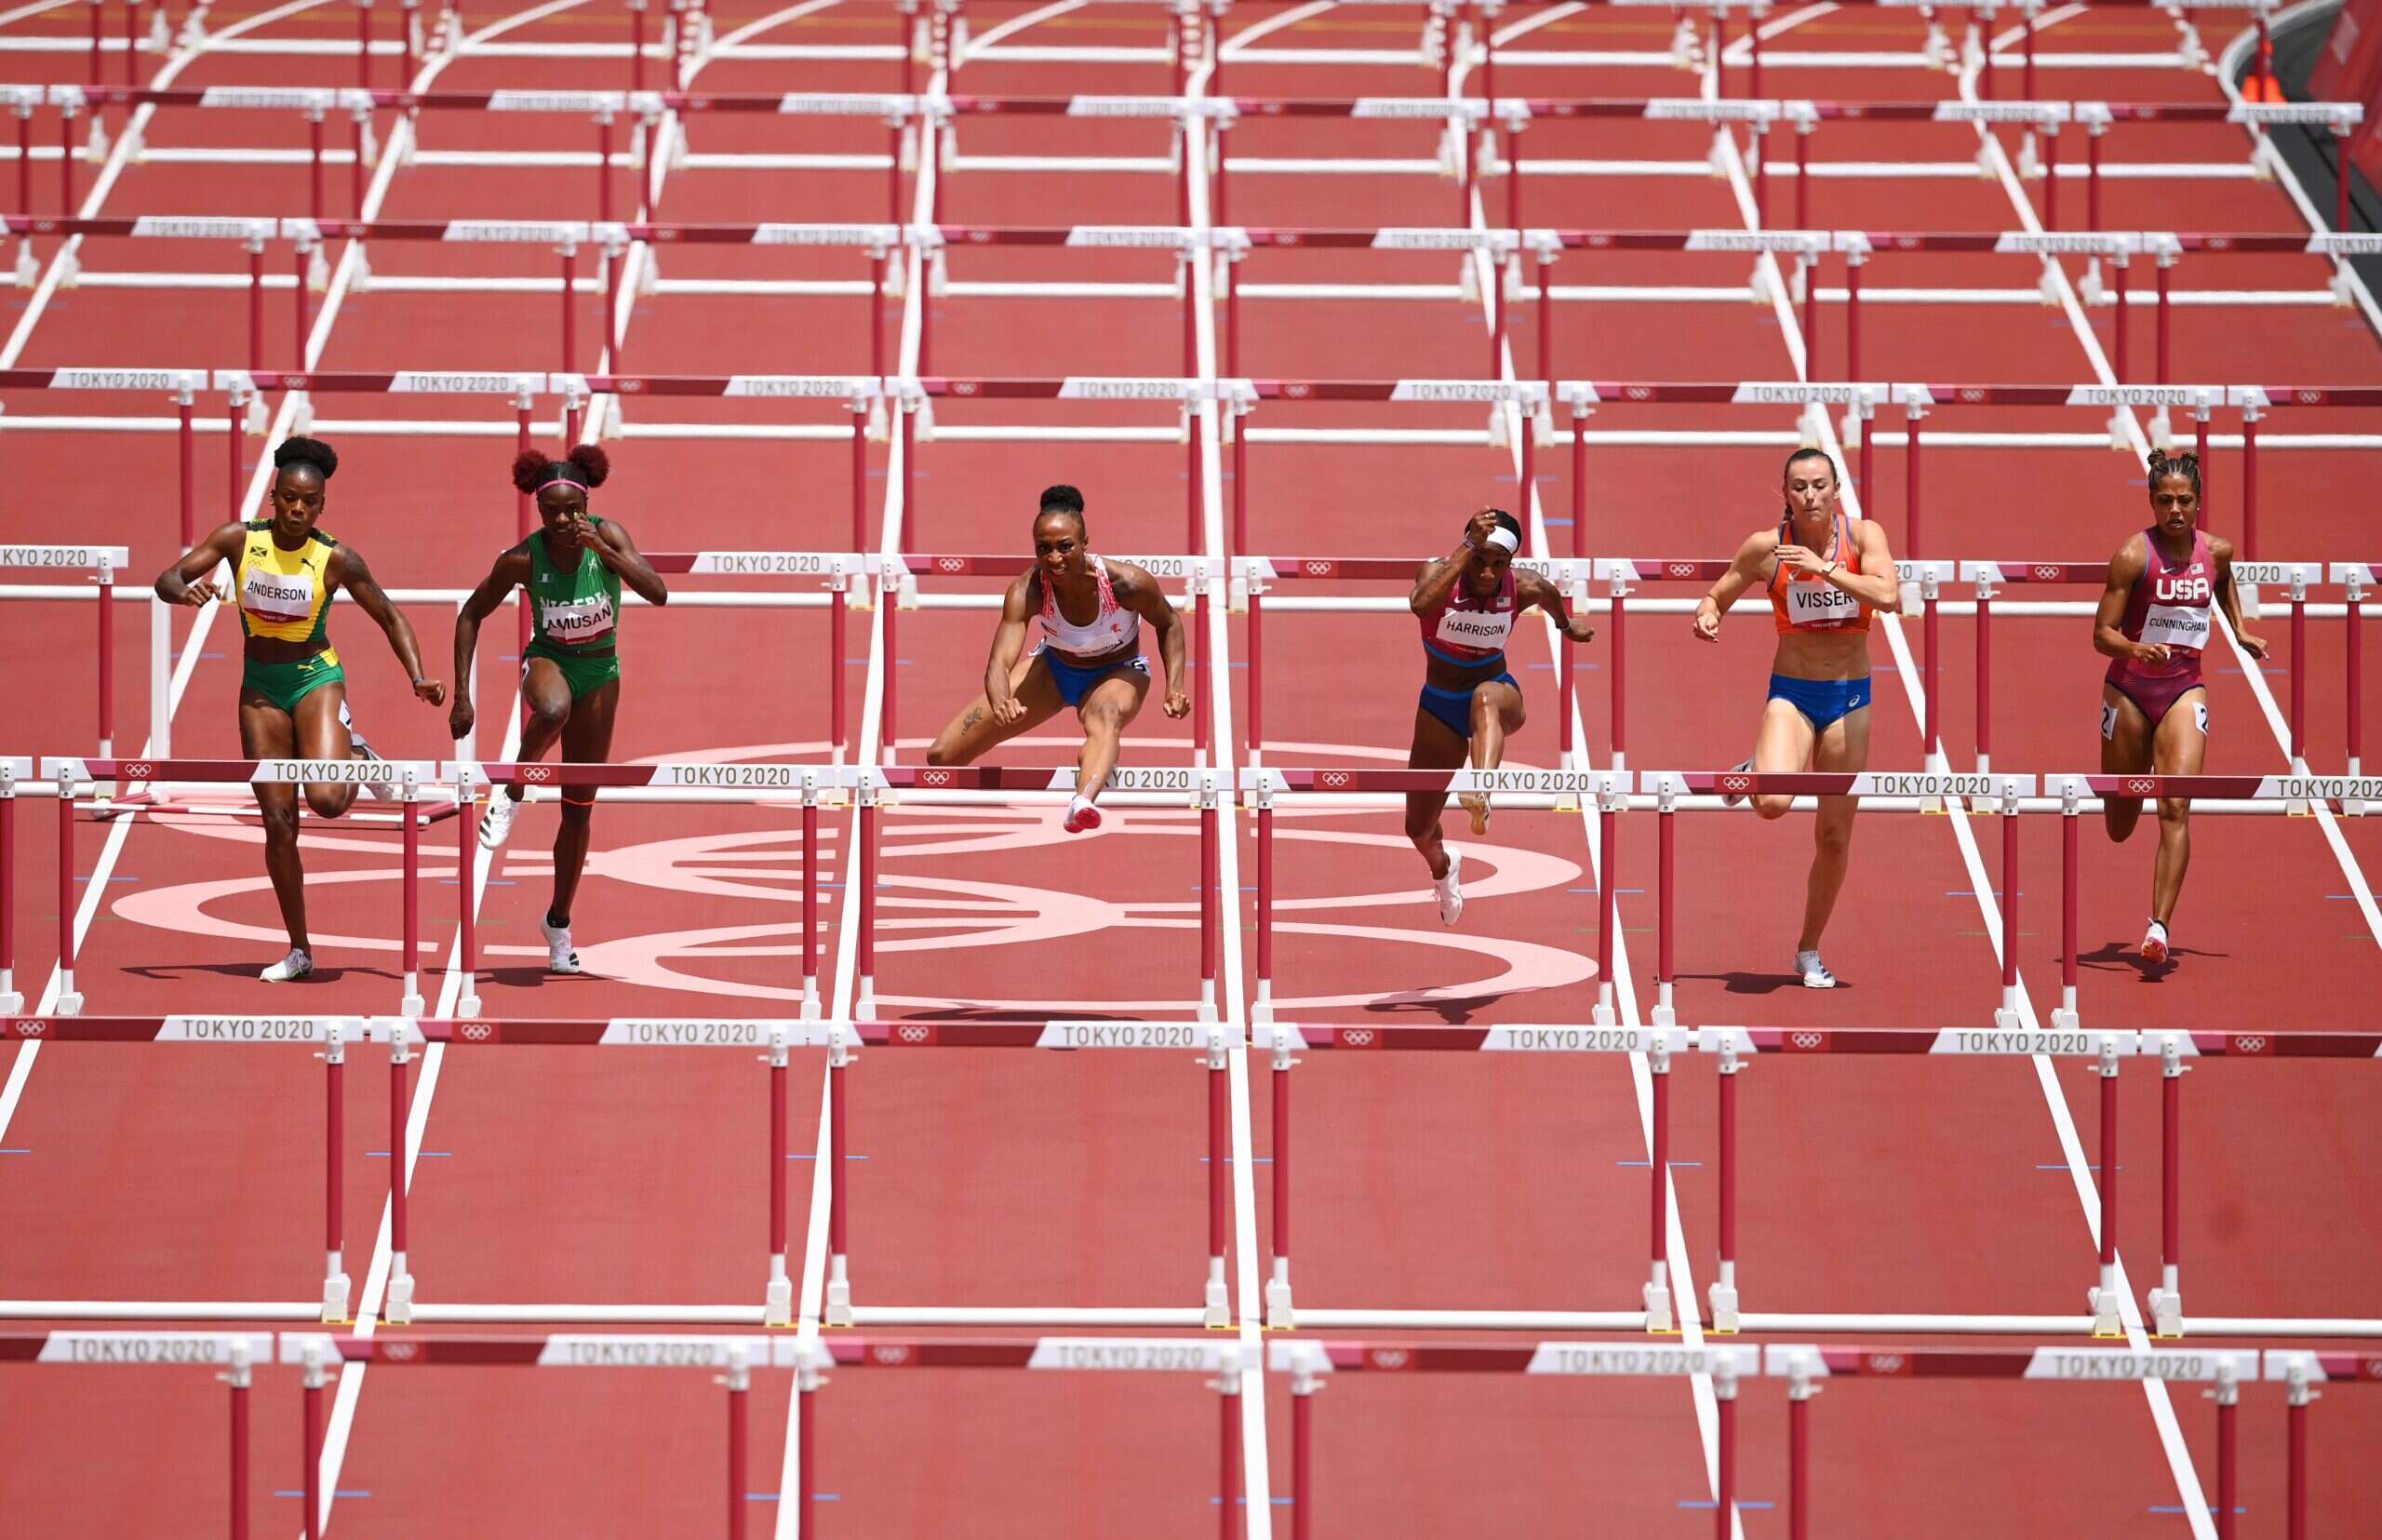 From the NS archive: Are women scared to run faster?